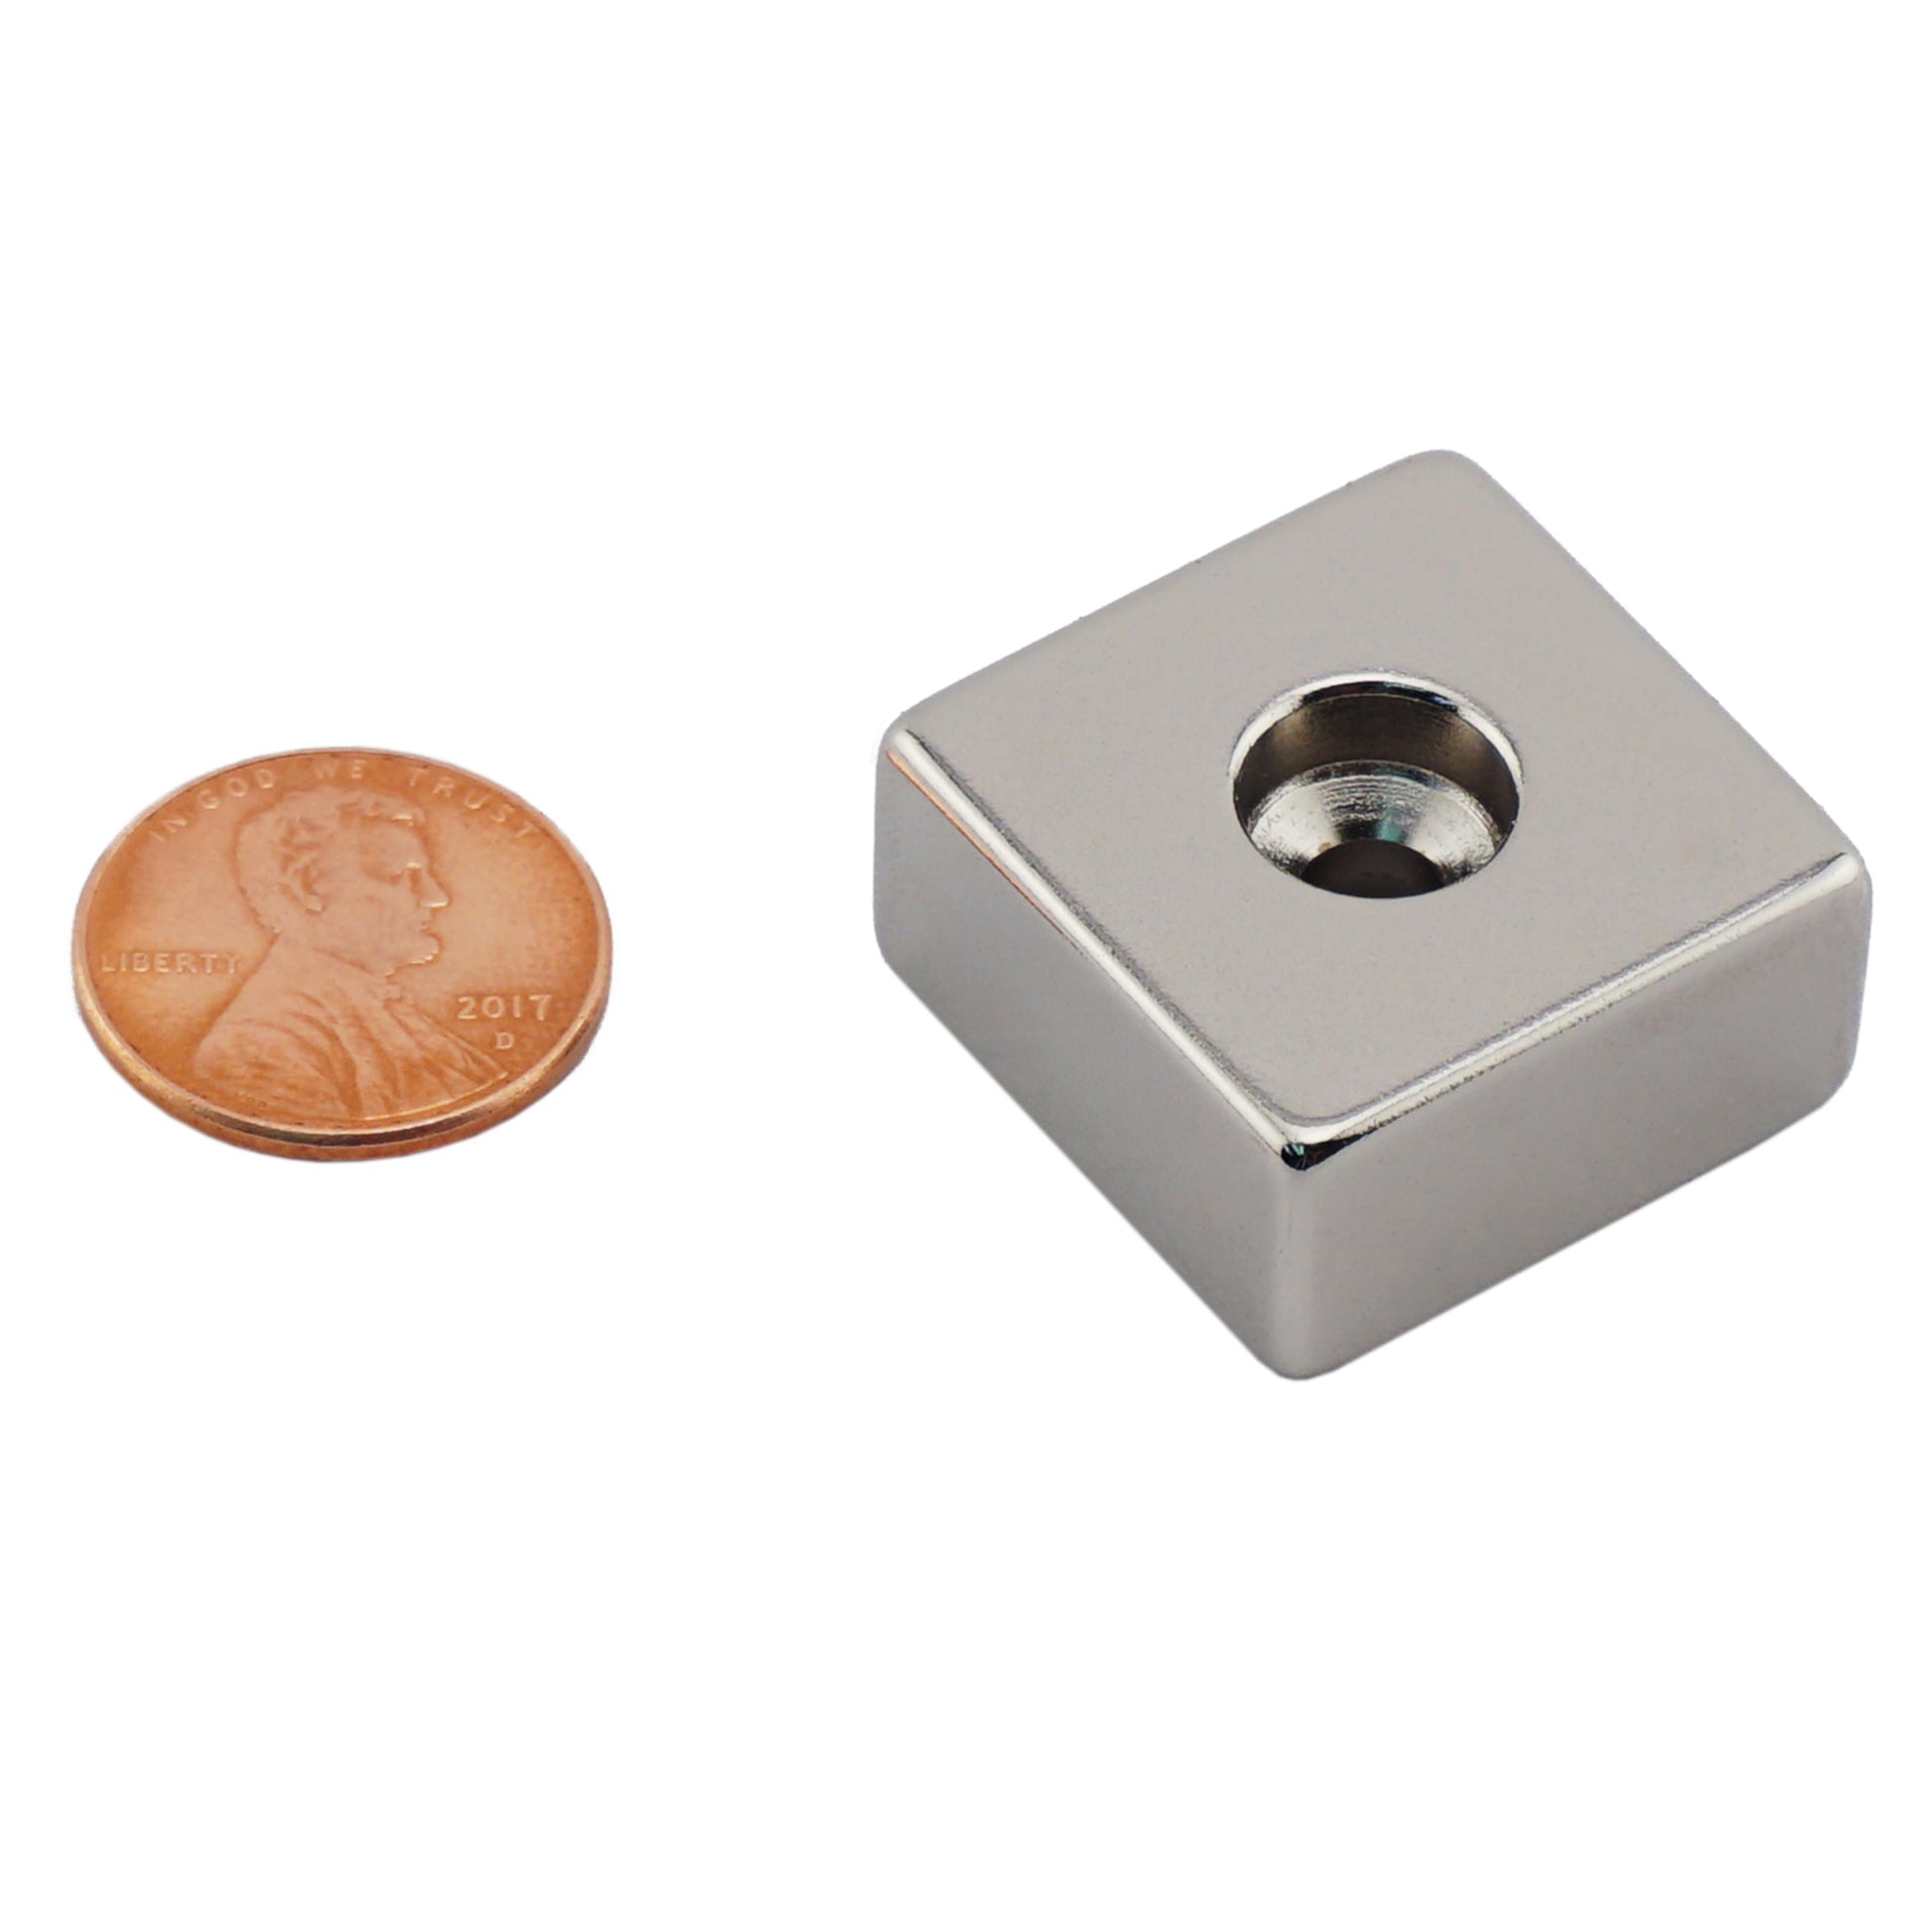 Load image into Gallery viewer, NB005052NCTB Neodymium Counterbore Block Magnet - Compared to Penny for Size Reference